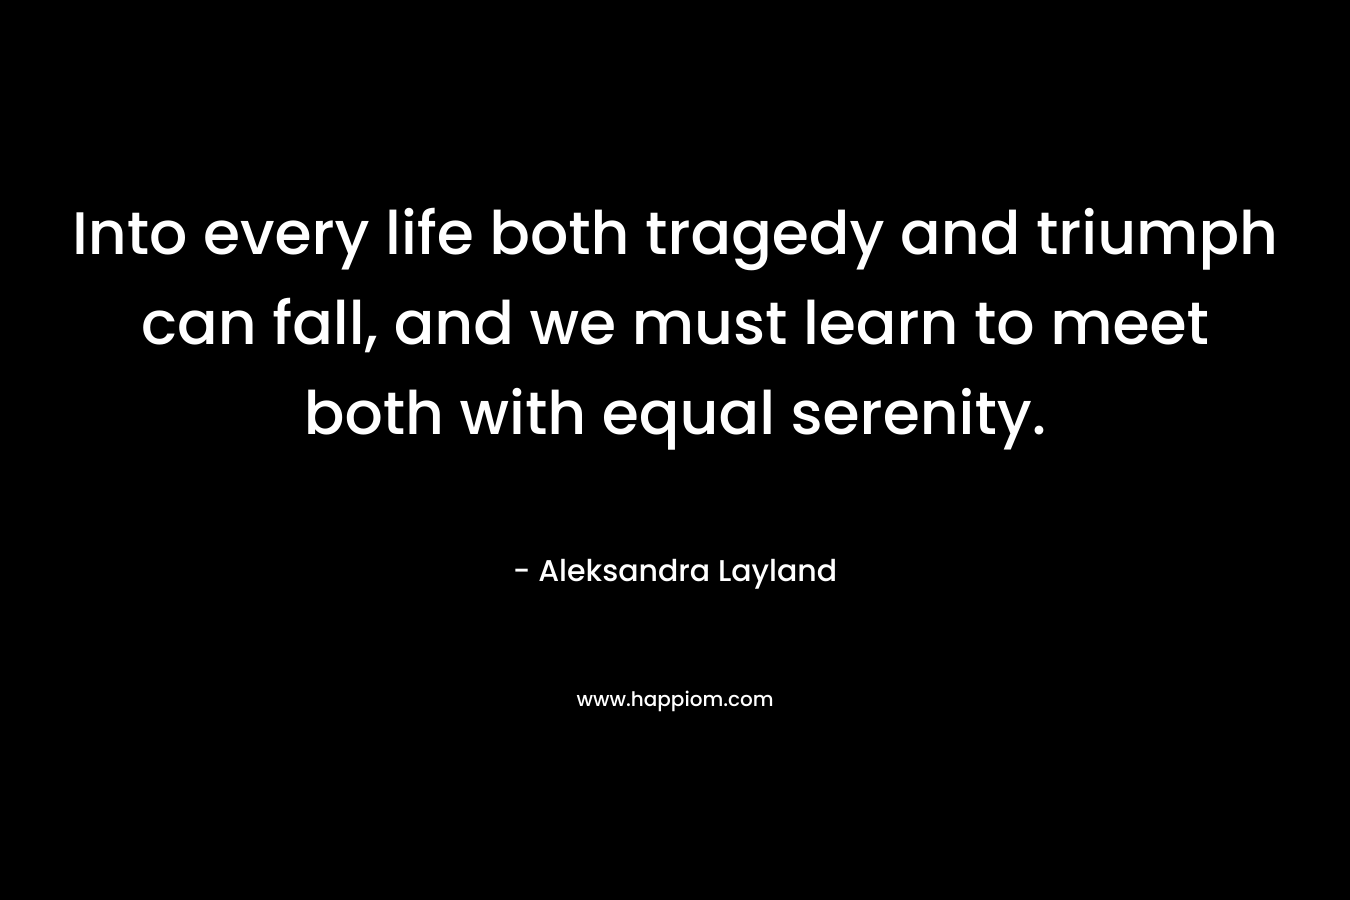 Into every life both tragedy and triumph can fall, and we must learn to meet both with equal serenity. – Aleksandra Layland